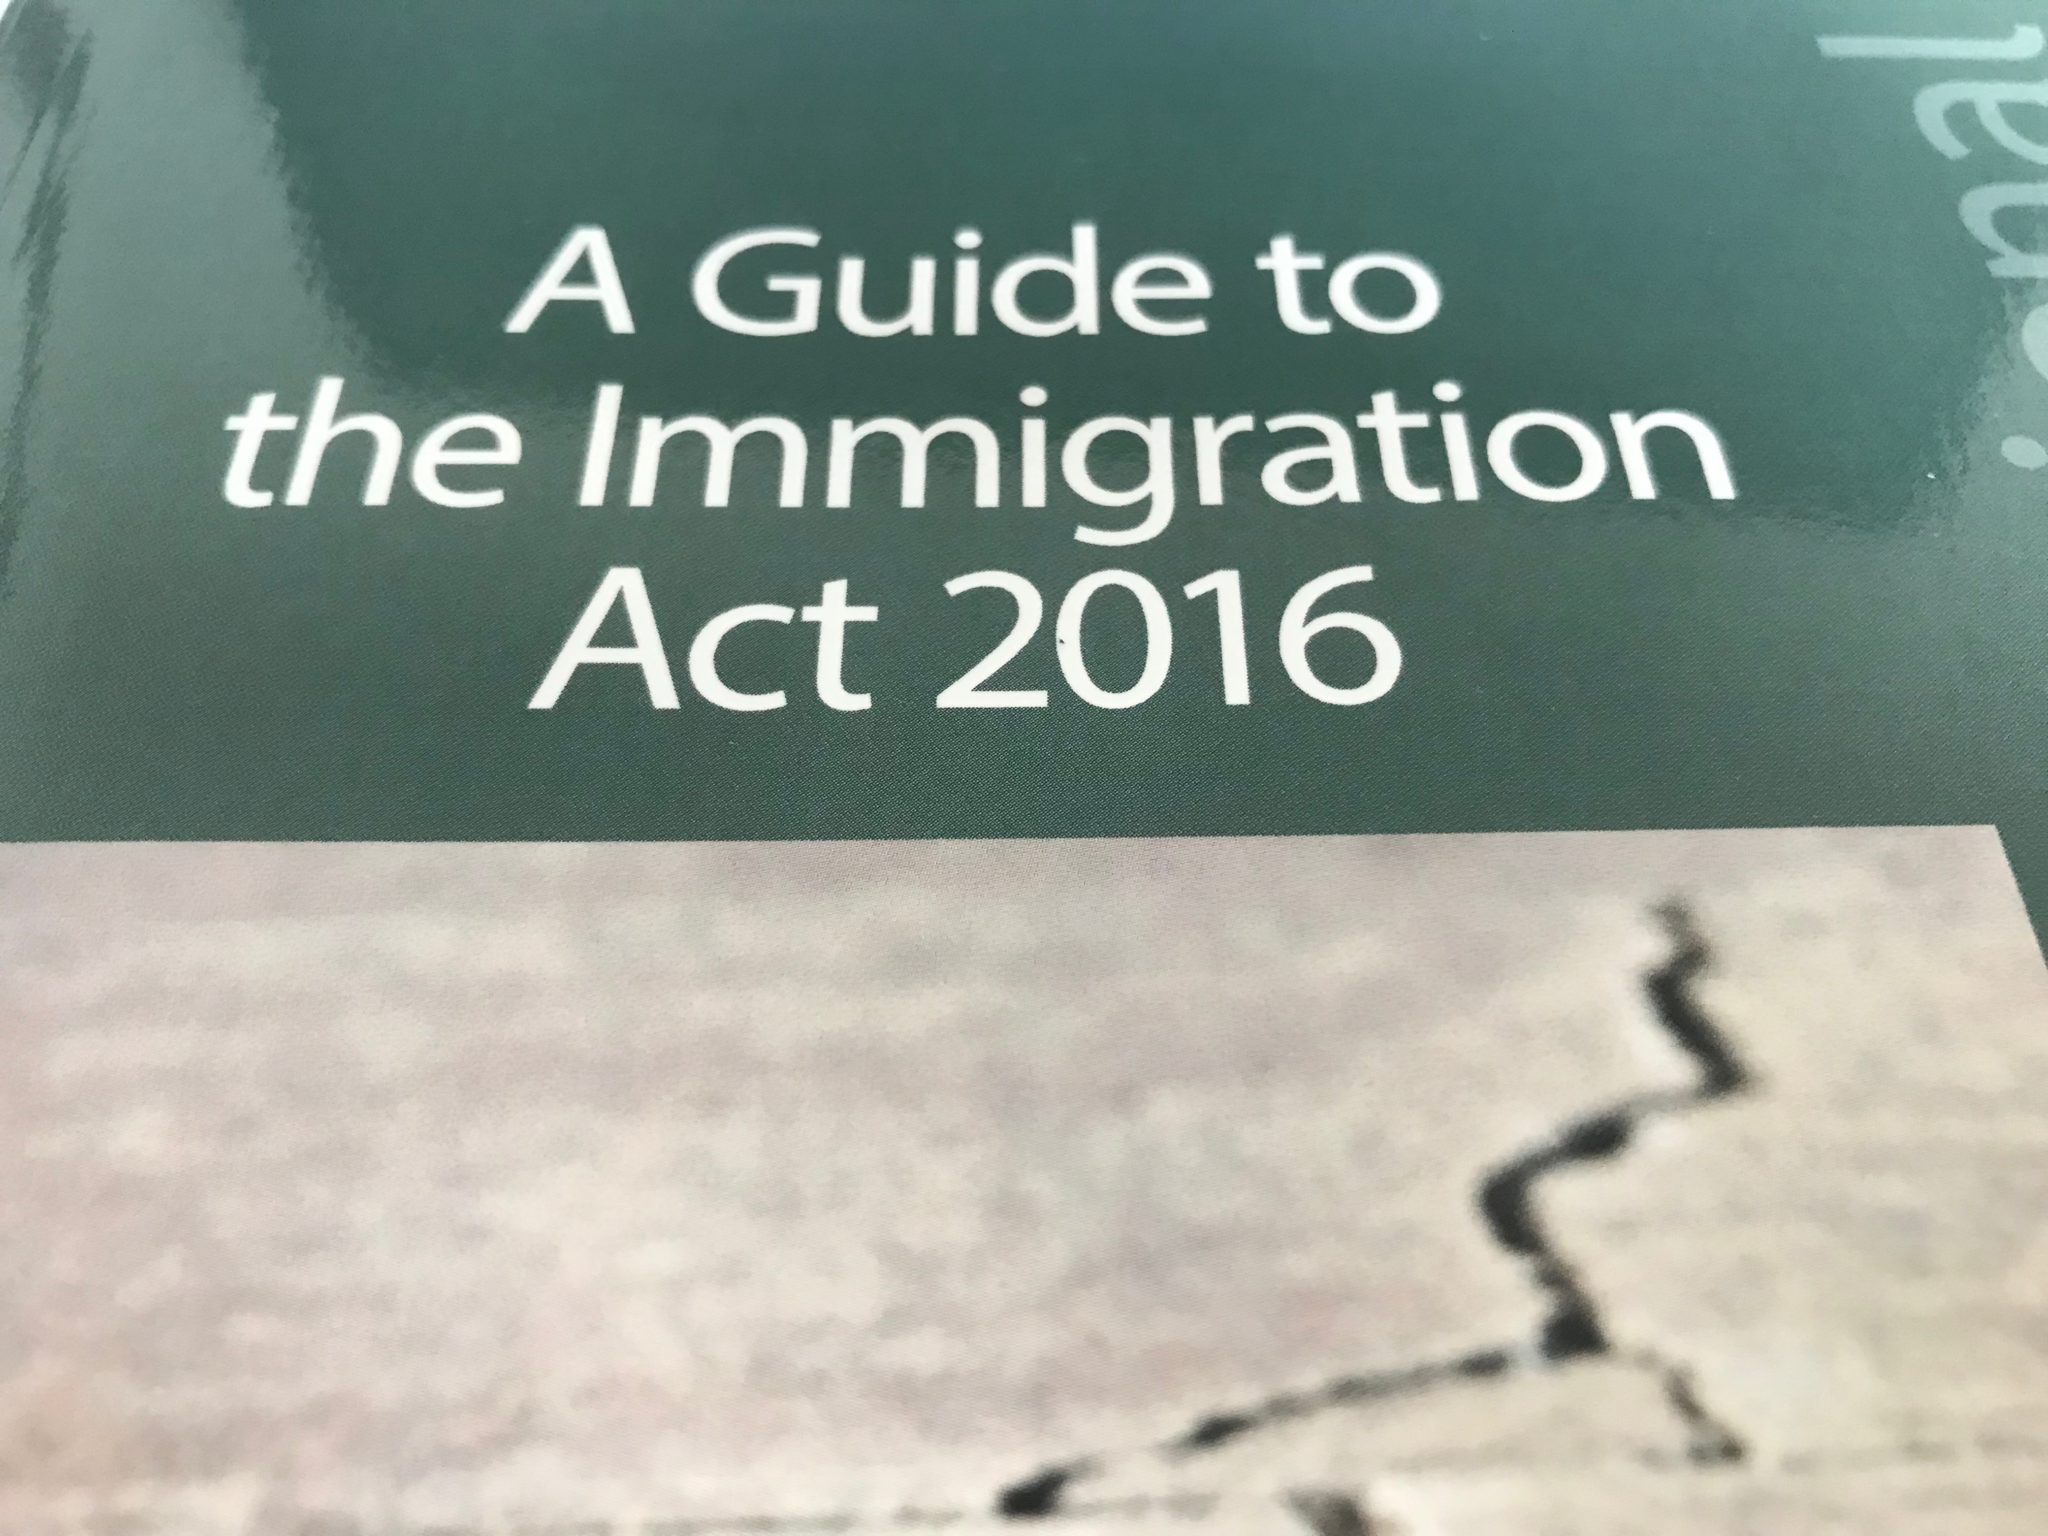 Book review: A Guide to the Immigration Act 2016 by Alison Harvey and Zoe Harper